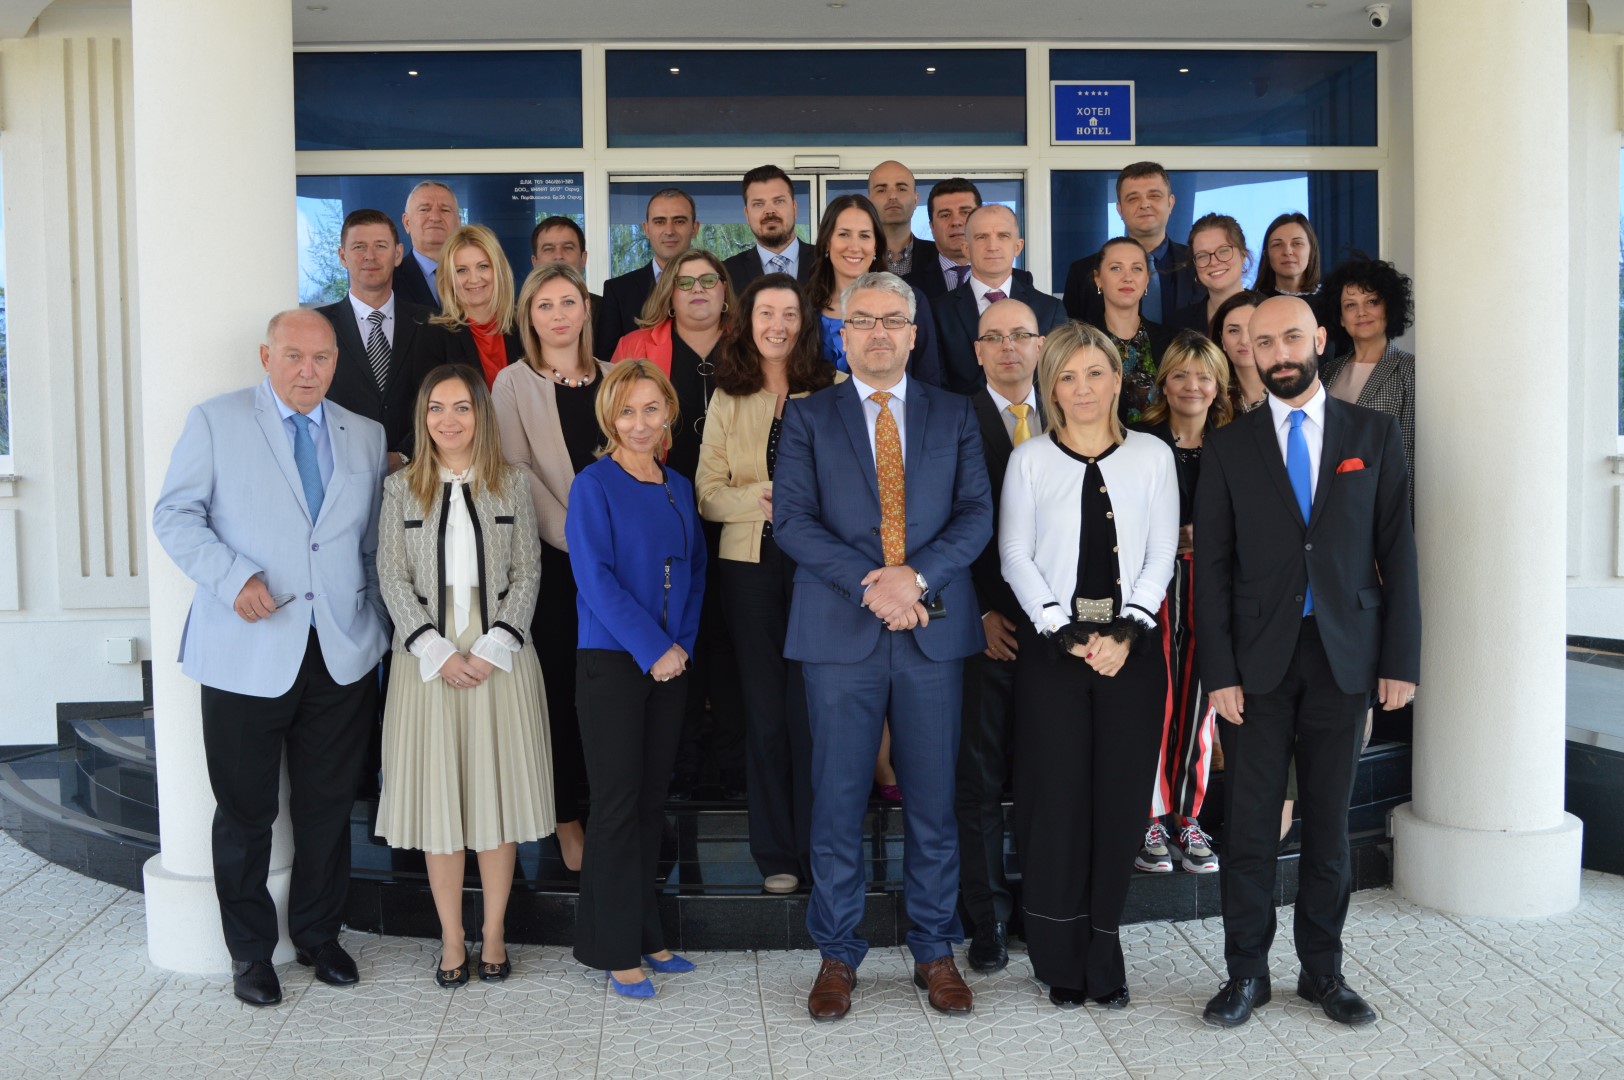 18-19 April 2019 – Meeting for Presentation of the Plan for Finalization of MARRI’s Basic Documents in Ohrid